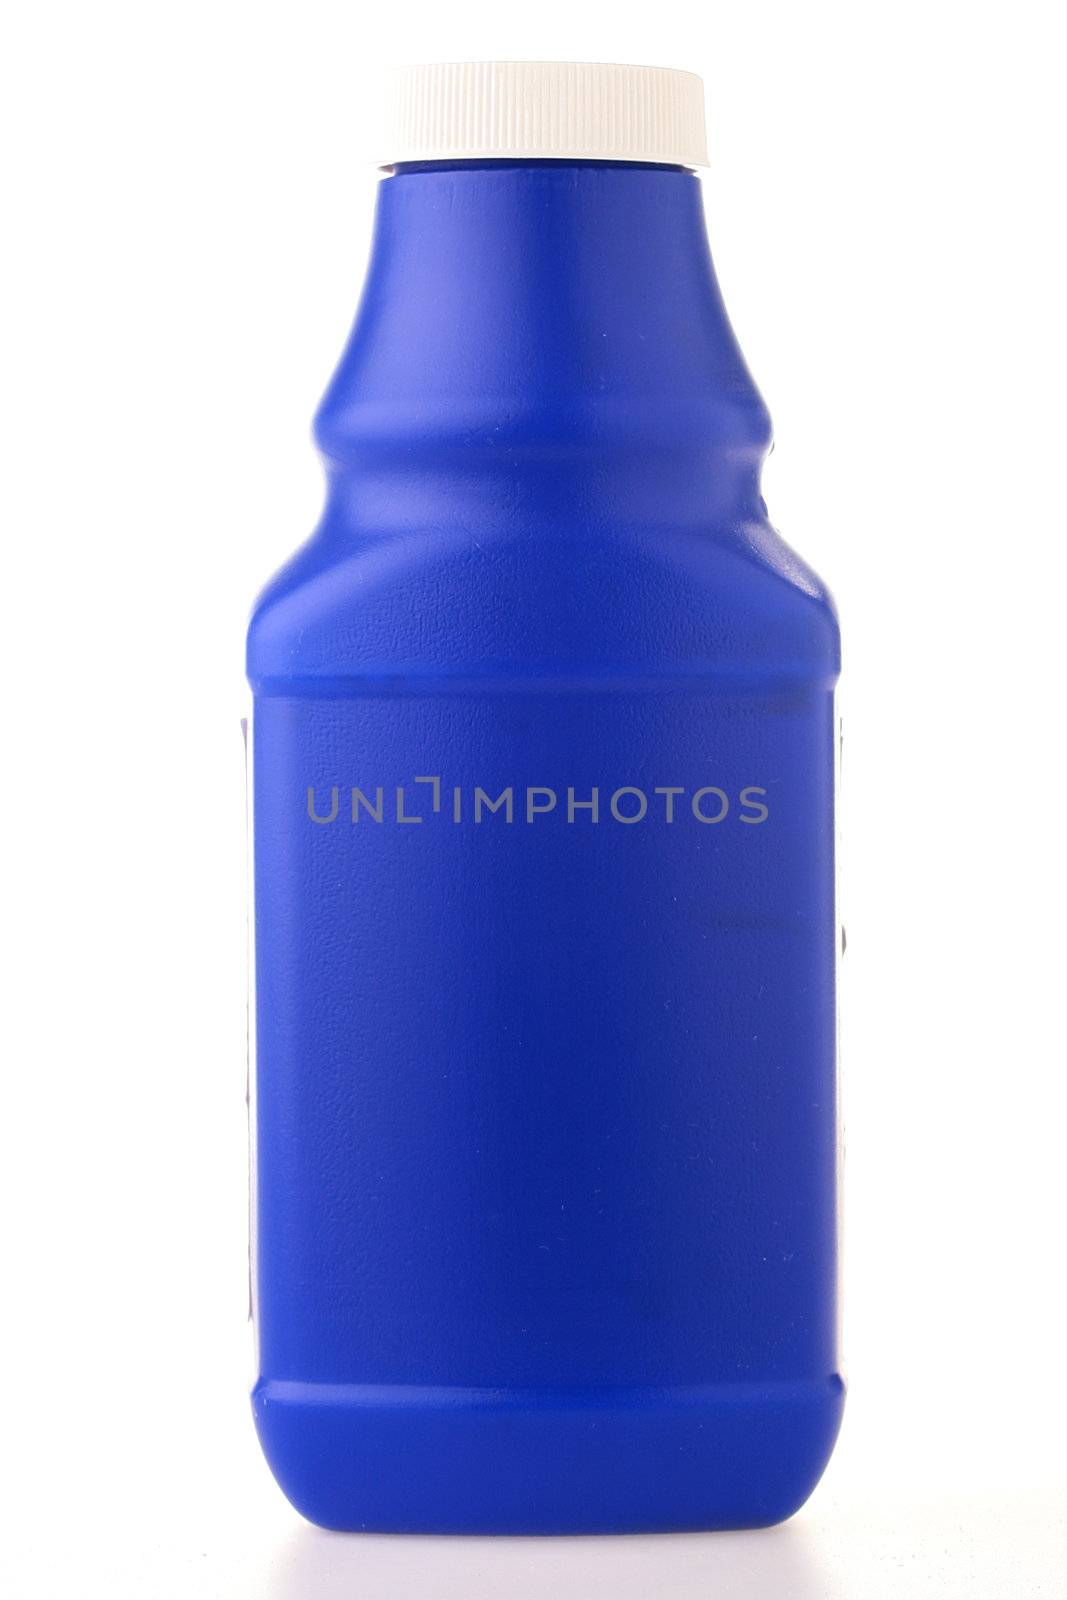 The plastic container from dark blue plastic with a white cover for drinks.